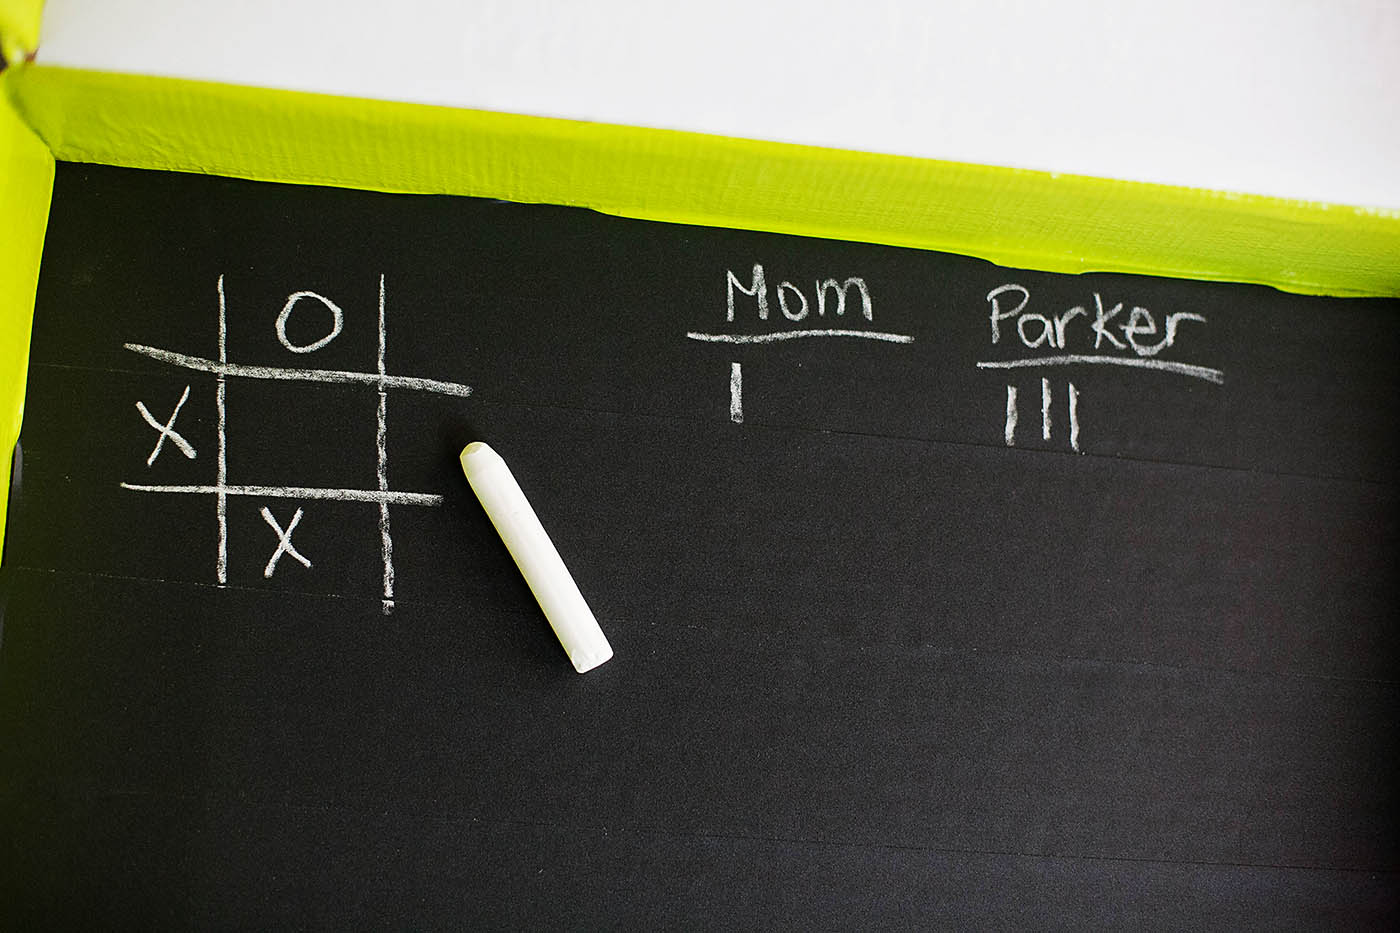 Use the chalkboard base to play travel games